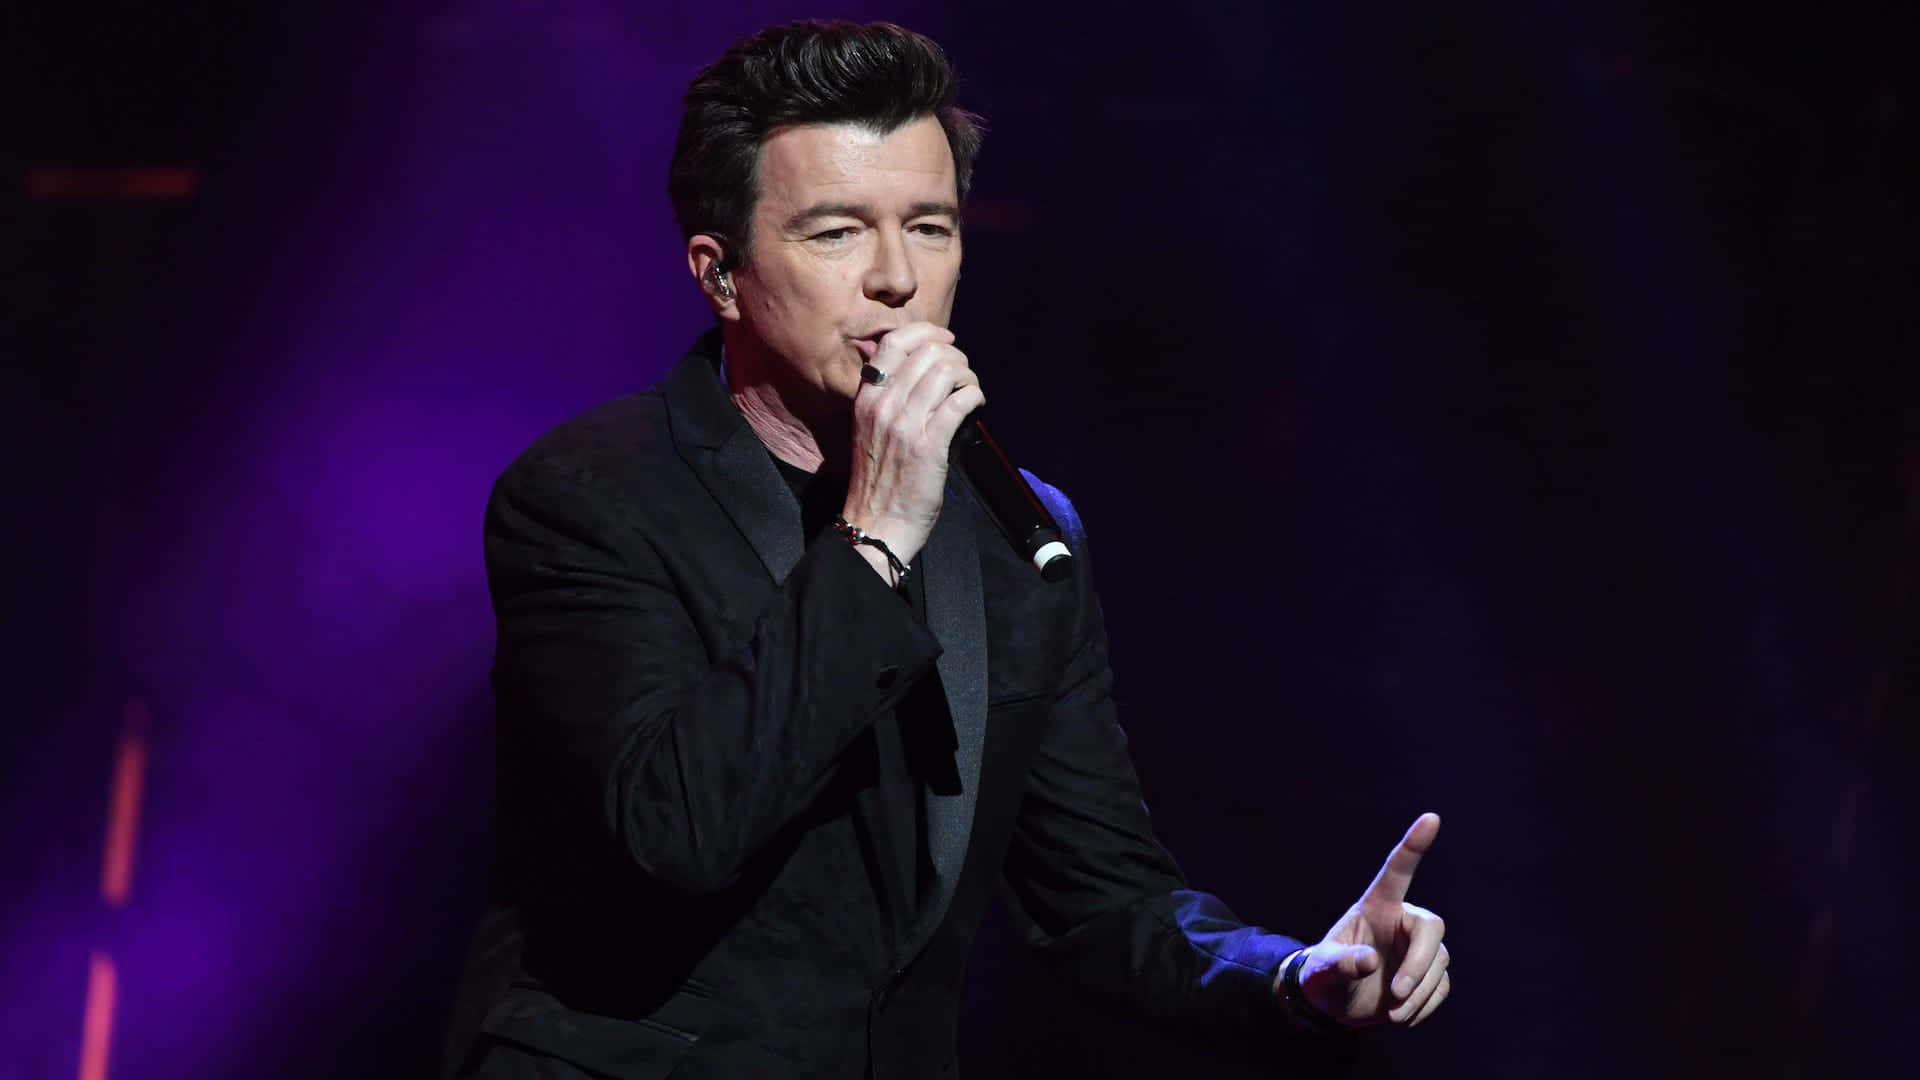 Rick Astley sings onstage during his "Never Gonna Give You Up" Tour Wallpaper